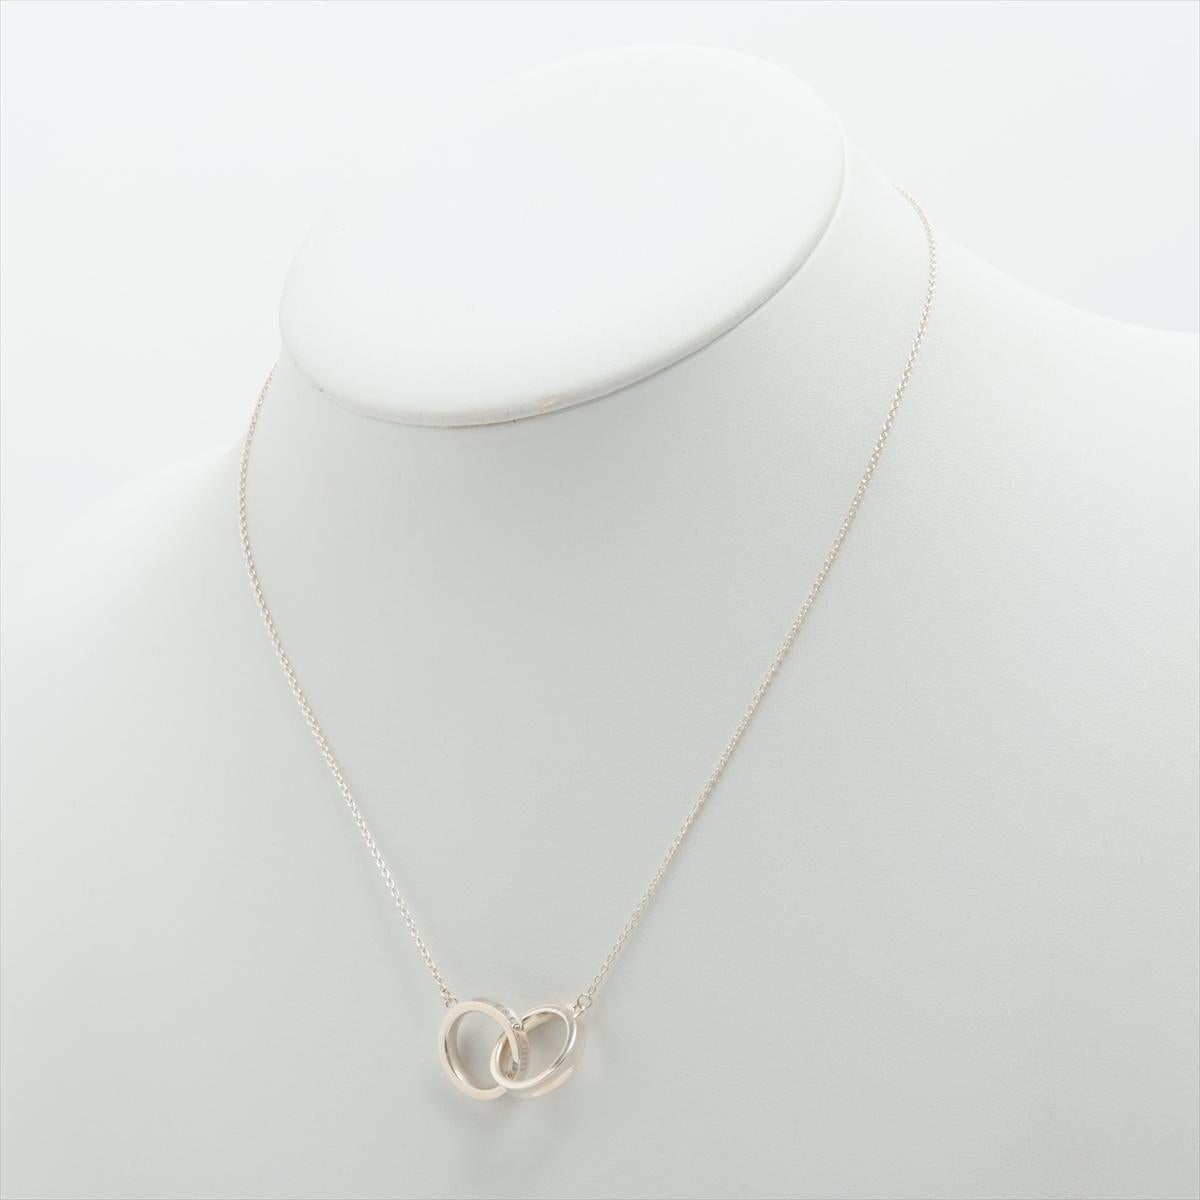 Women's Tiffany & Co. 1837 Interlocking Circle Necklace Silver For Sale